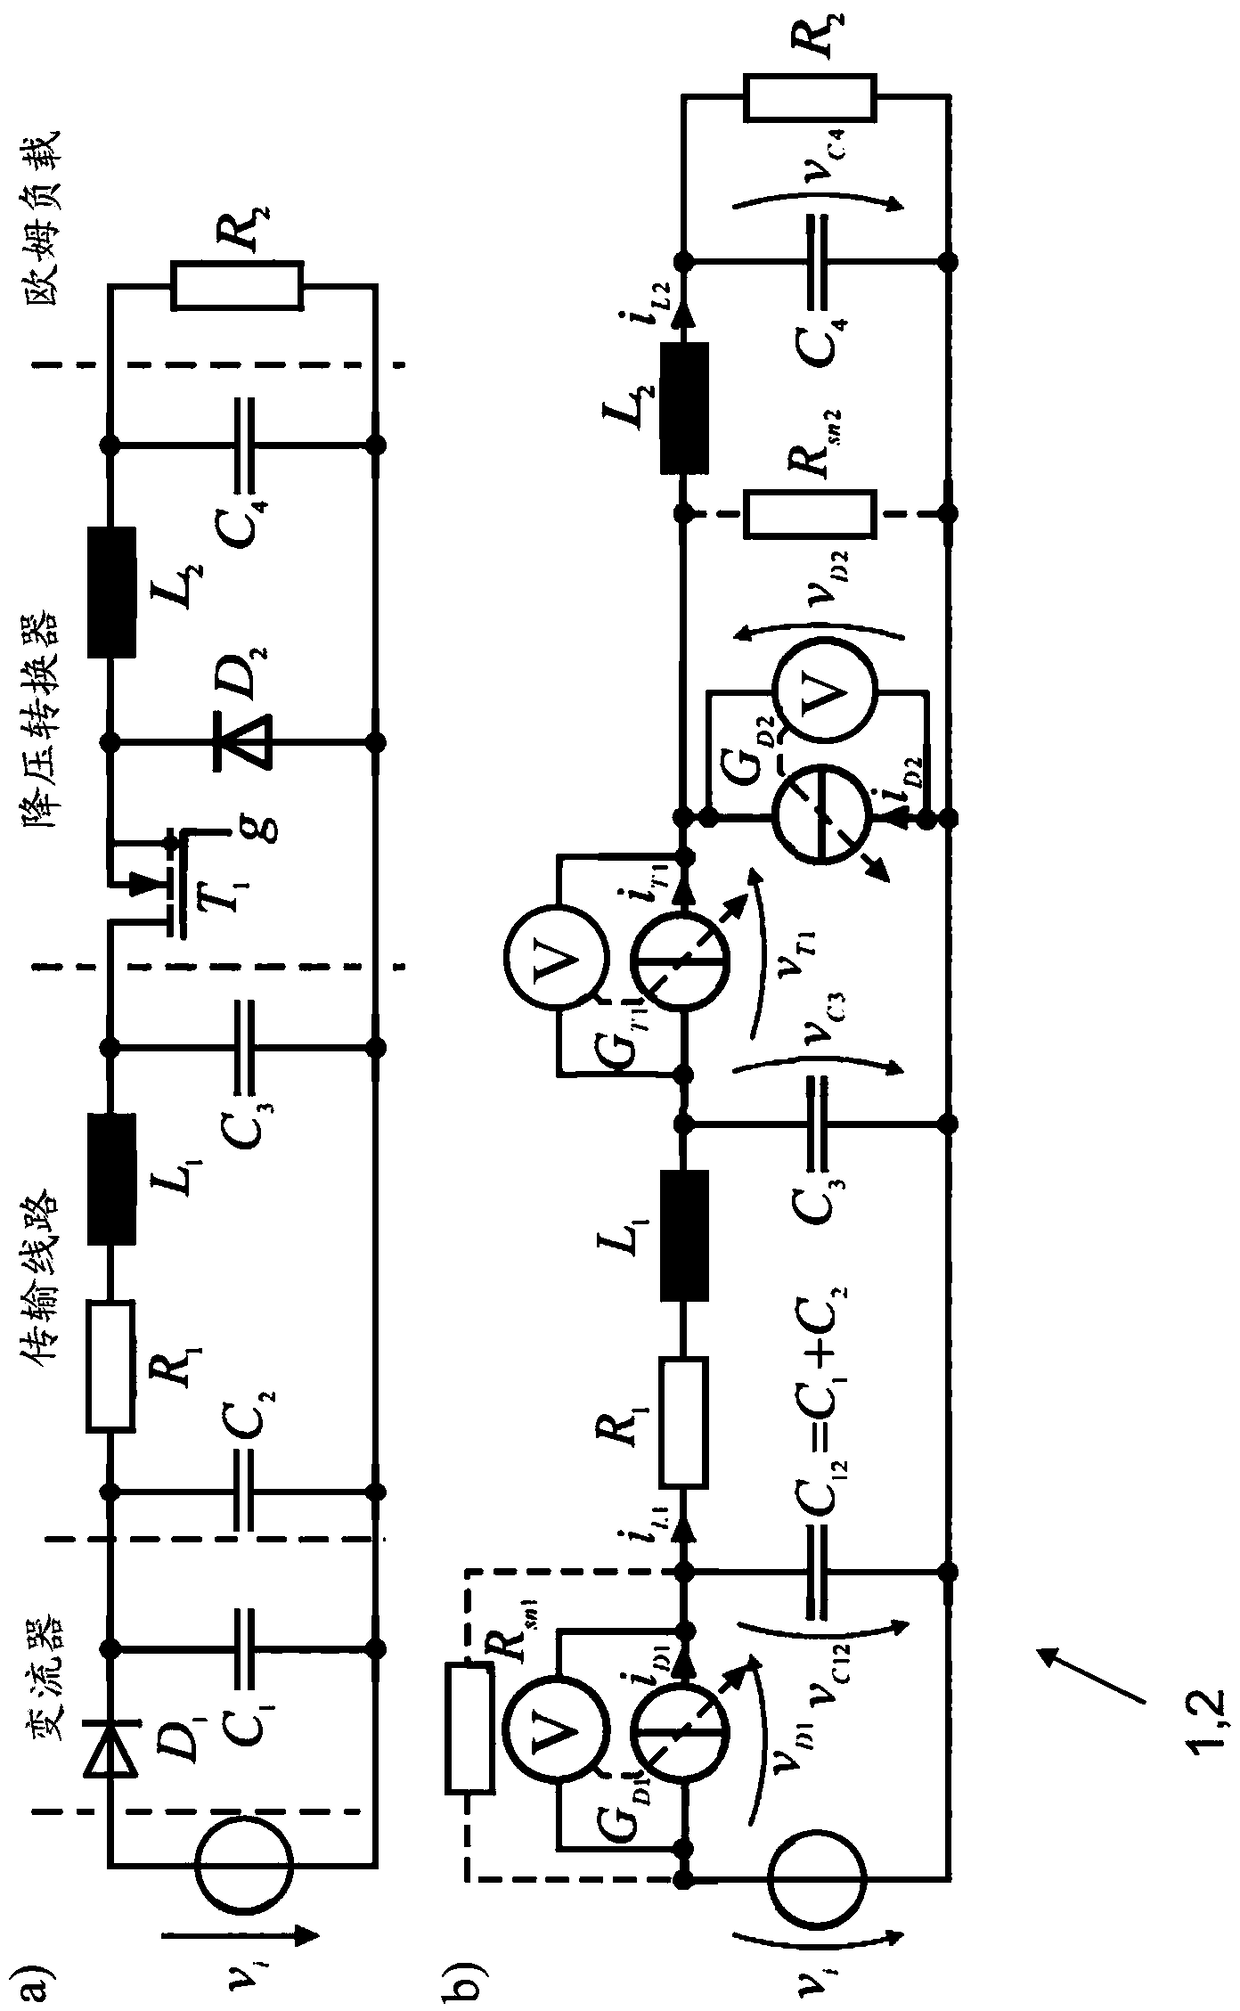 Computer-implemented method for simulation of entire electronic circuit